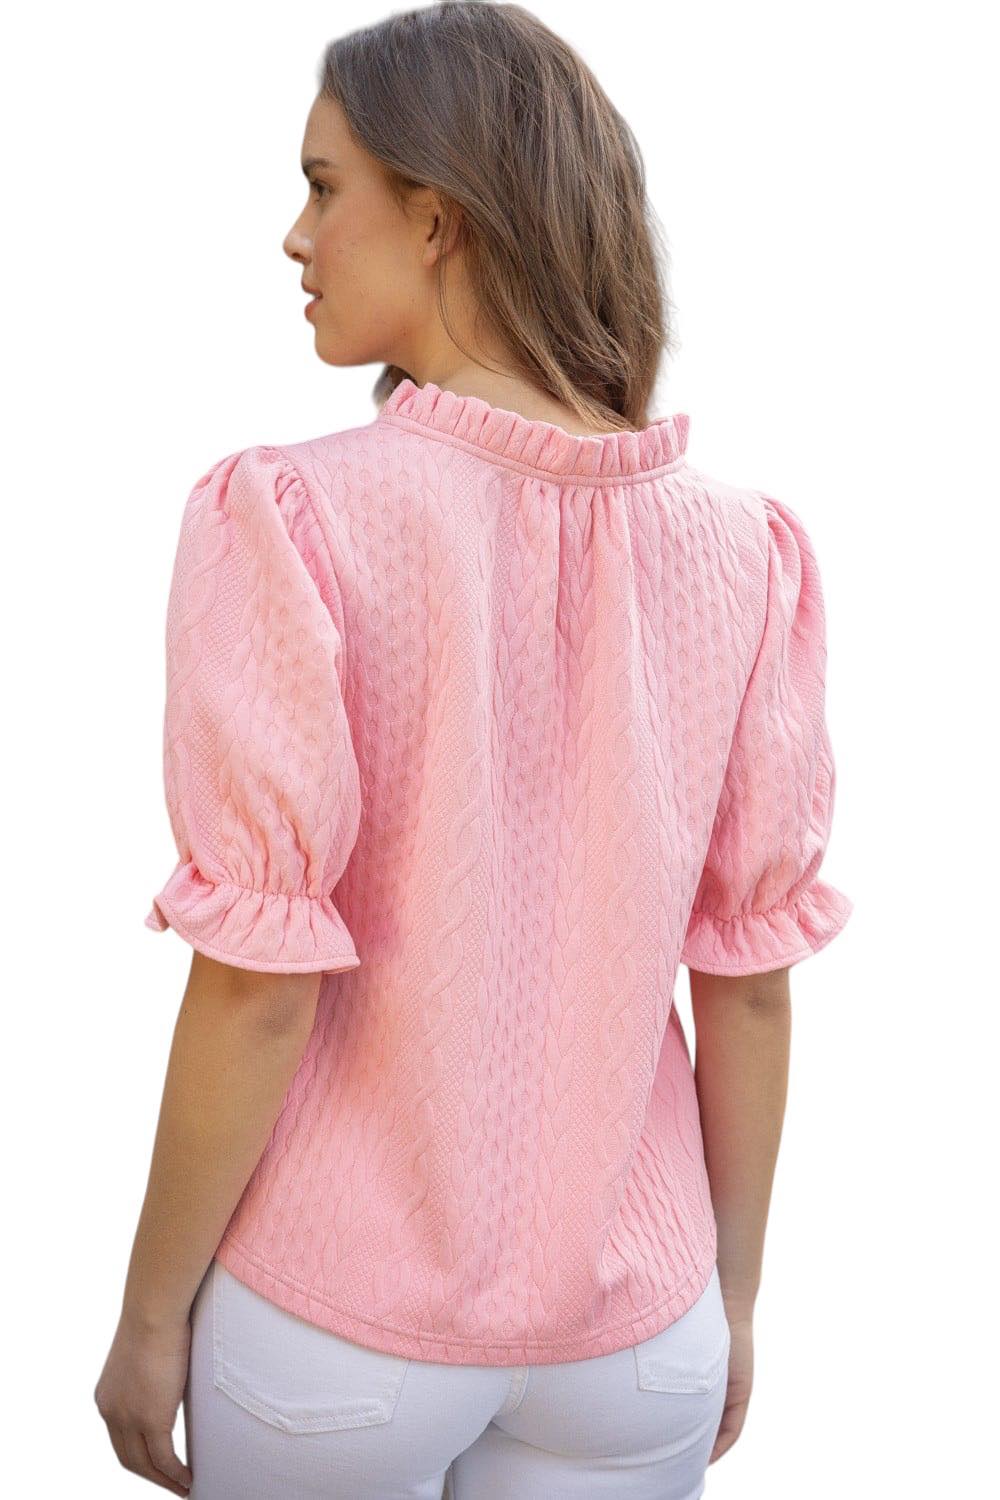 Pink: Graceful Glam Top